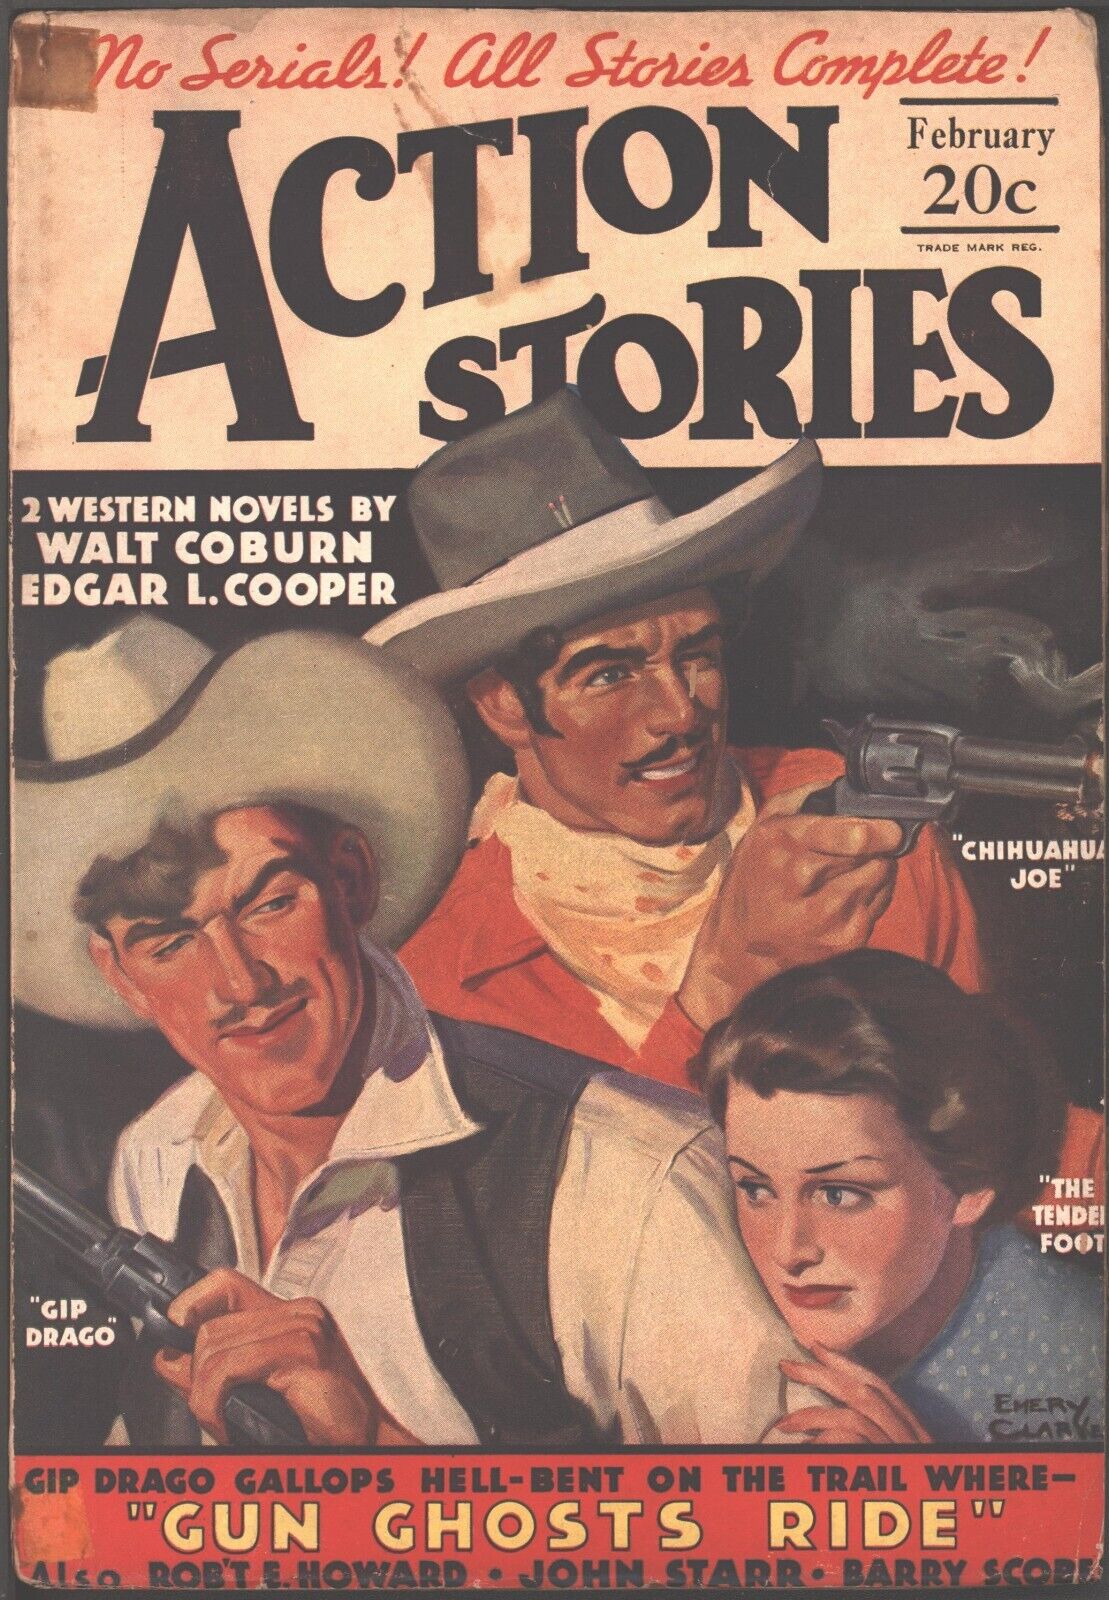 Action Stories 1936 February. Contains Pilgrims to the Pecos by Robert E. Howard